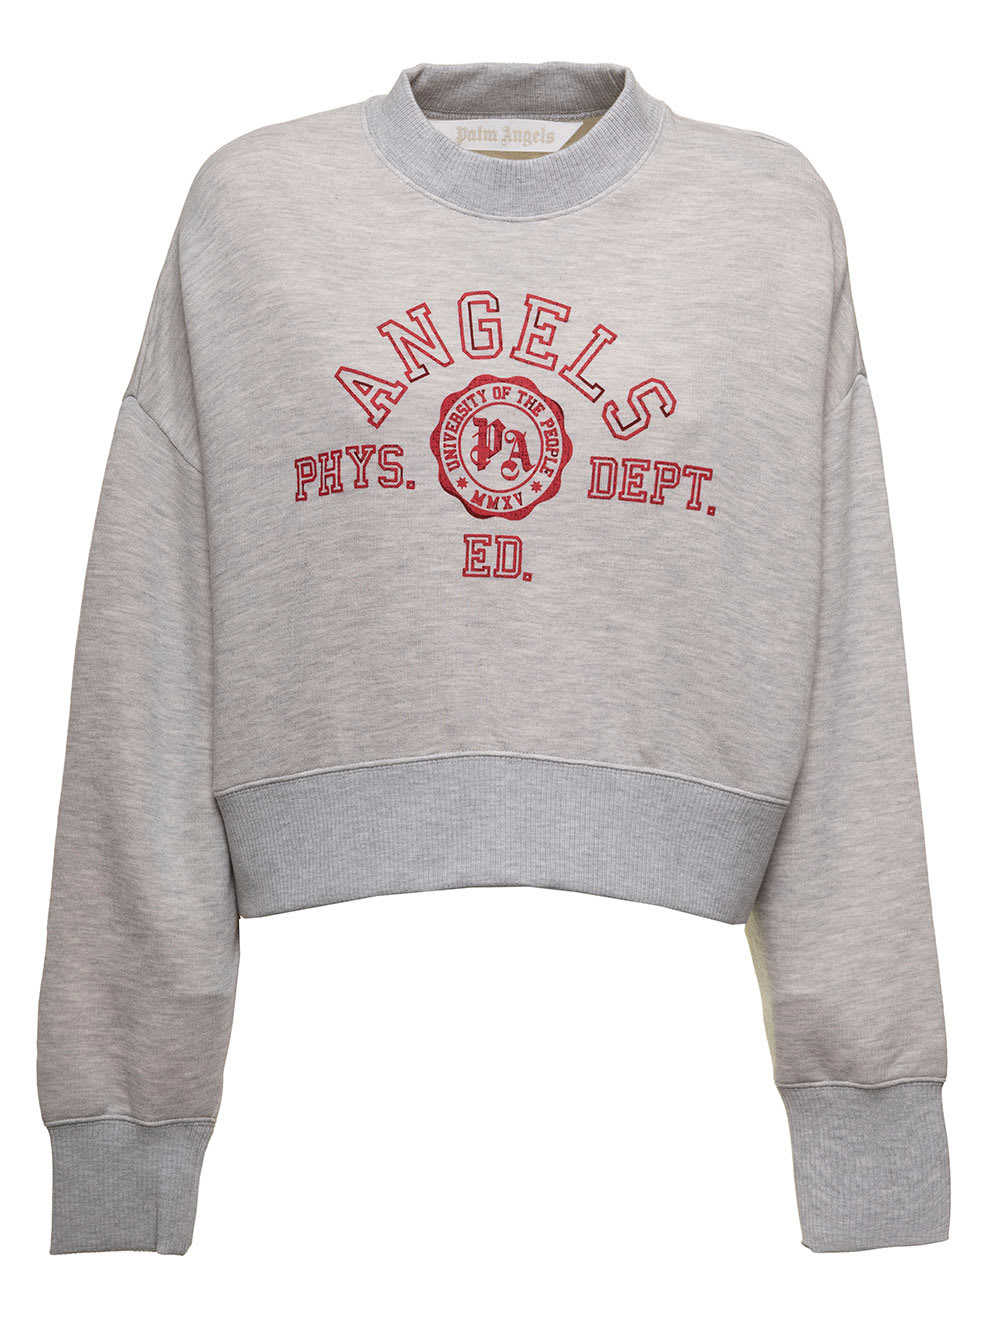 Palm Angels Womans Grey Cotton Sweatshirt With College Print